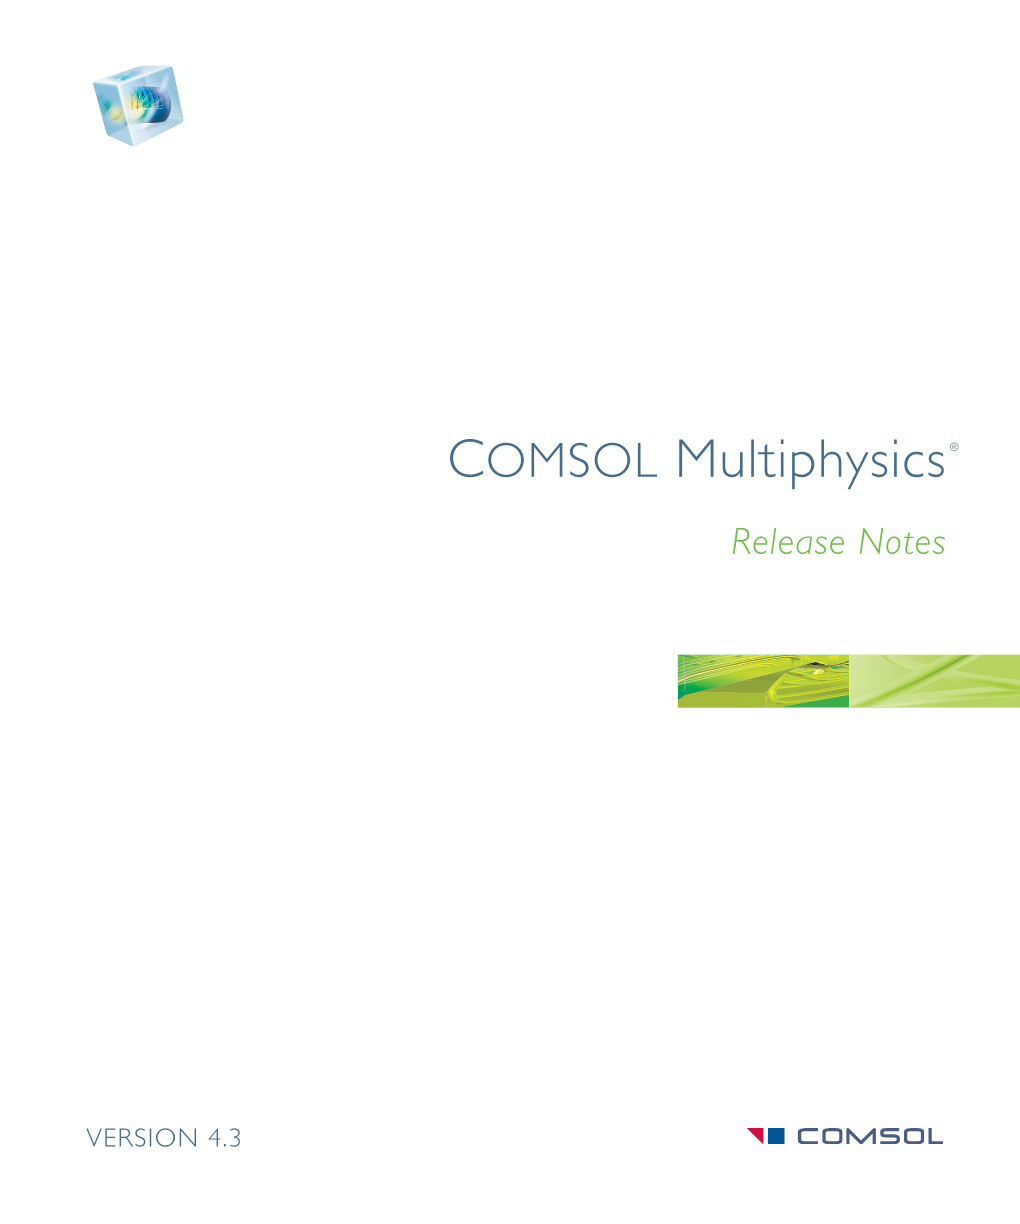 COMSOL Multiphysics Version 4.3 Contains Many New Functions and Additions to the COMSOL Product Suite